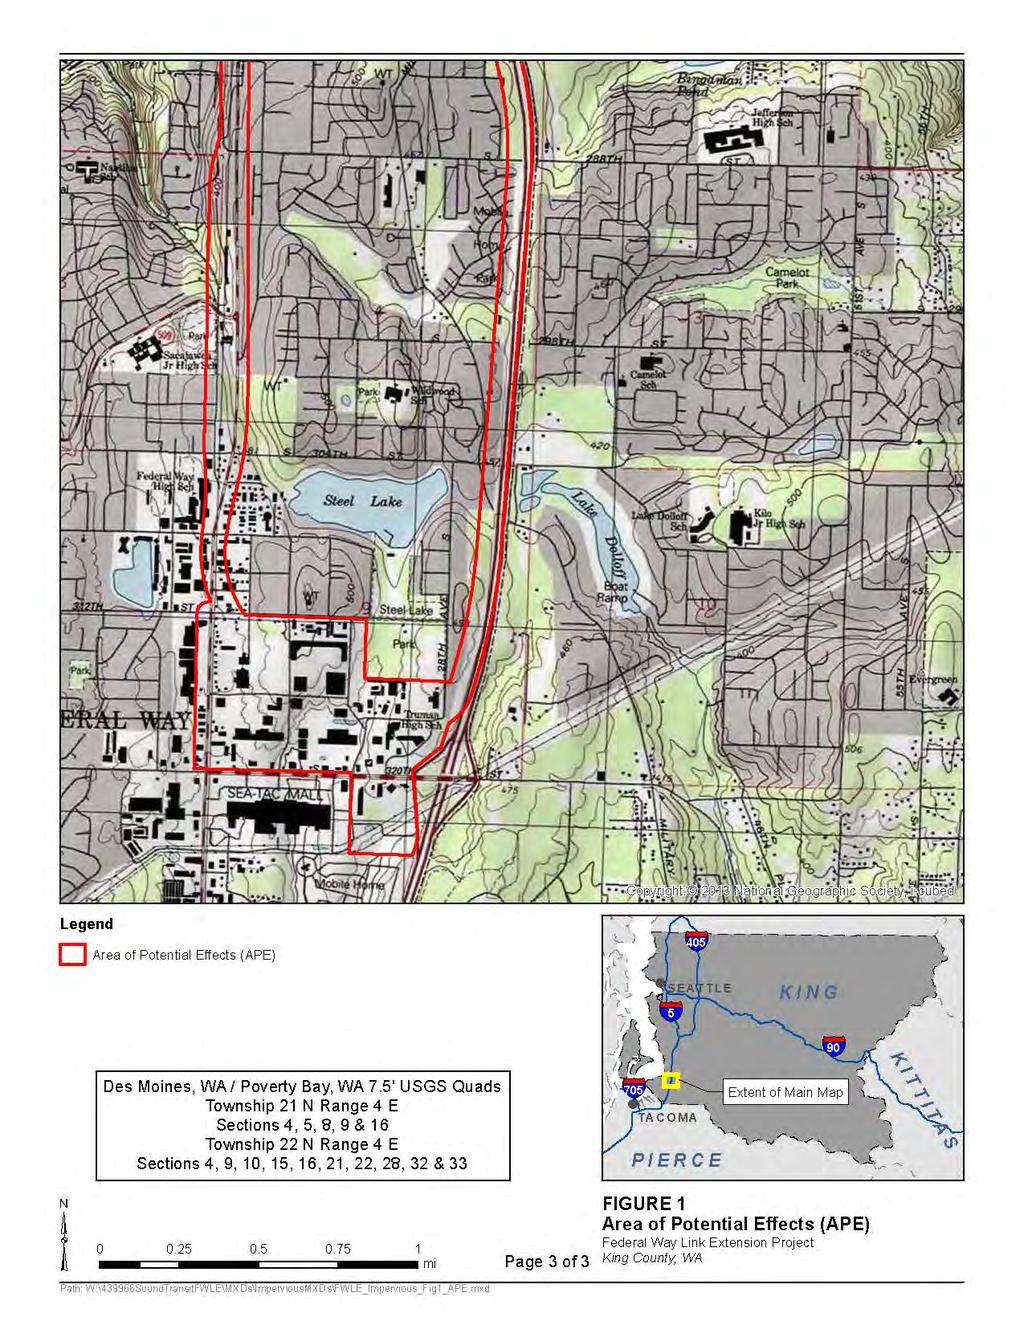 Federal Way Link Extension 6-6 Research Design for Archaeological Fieldwork March